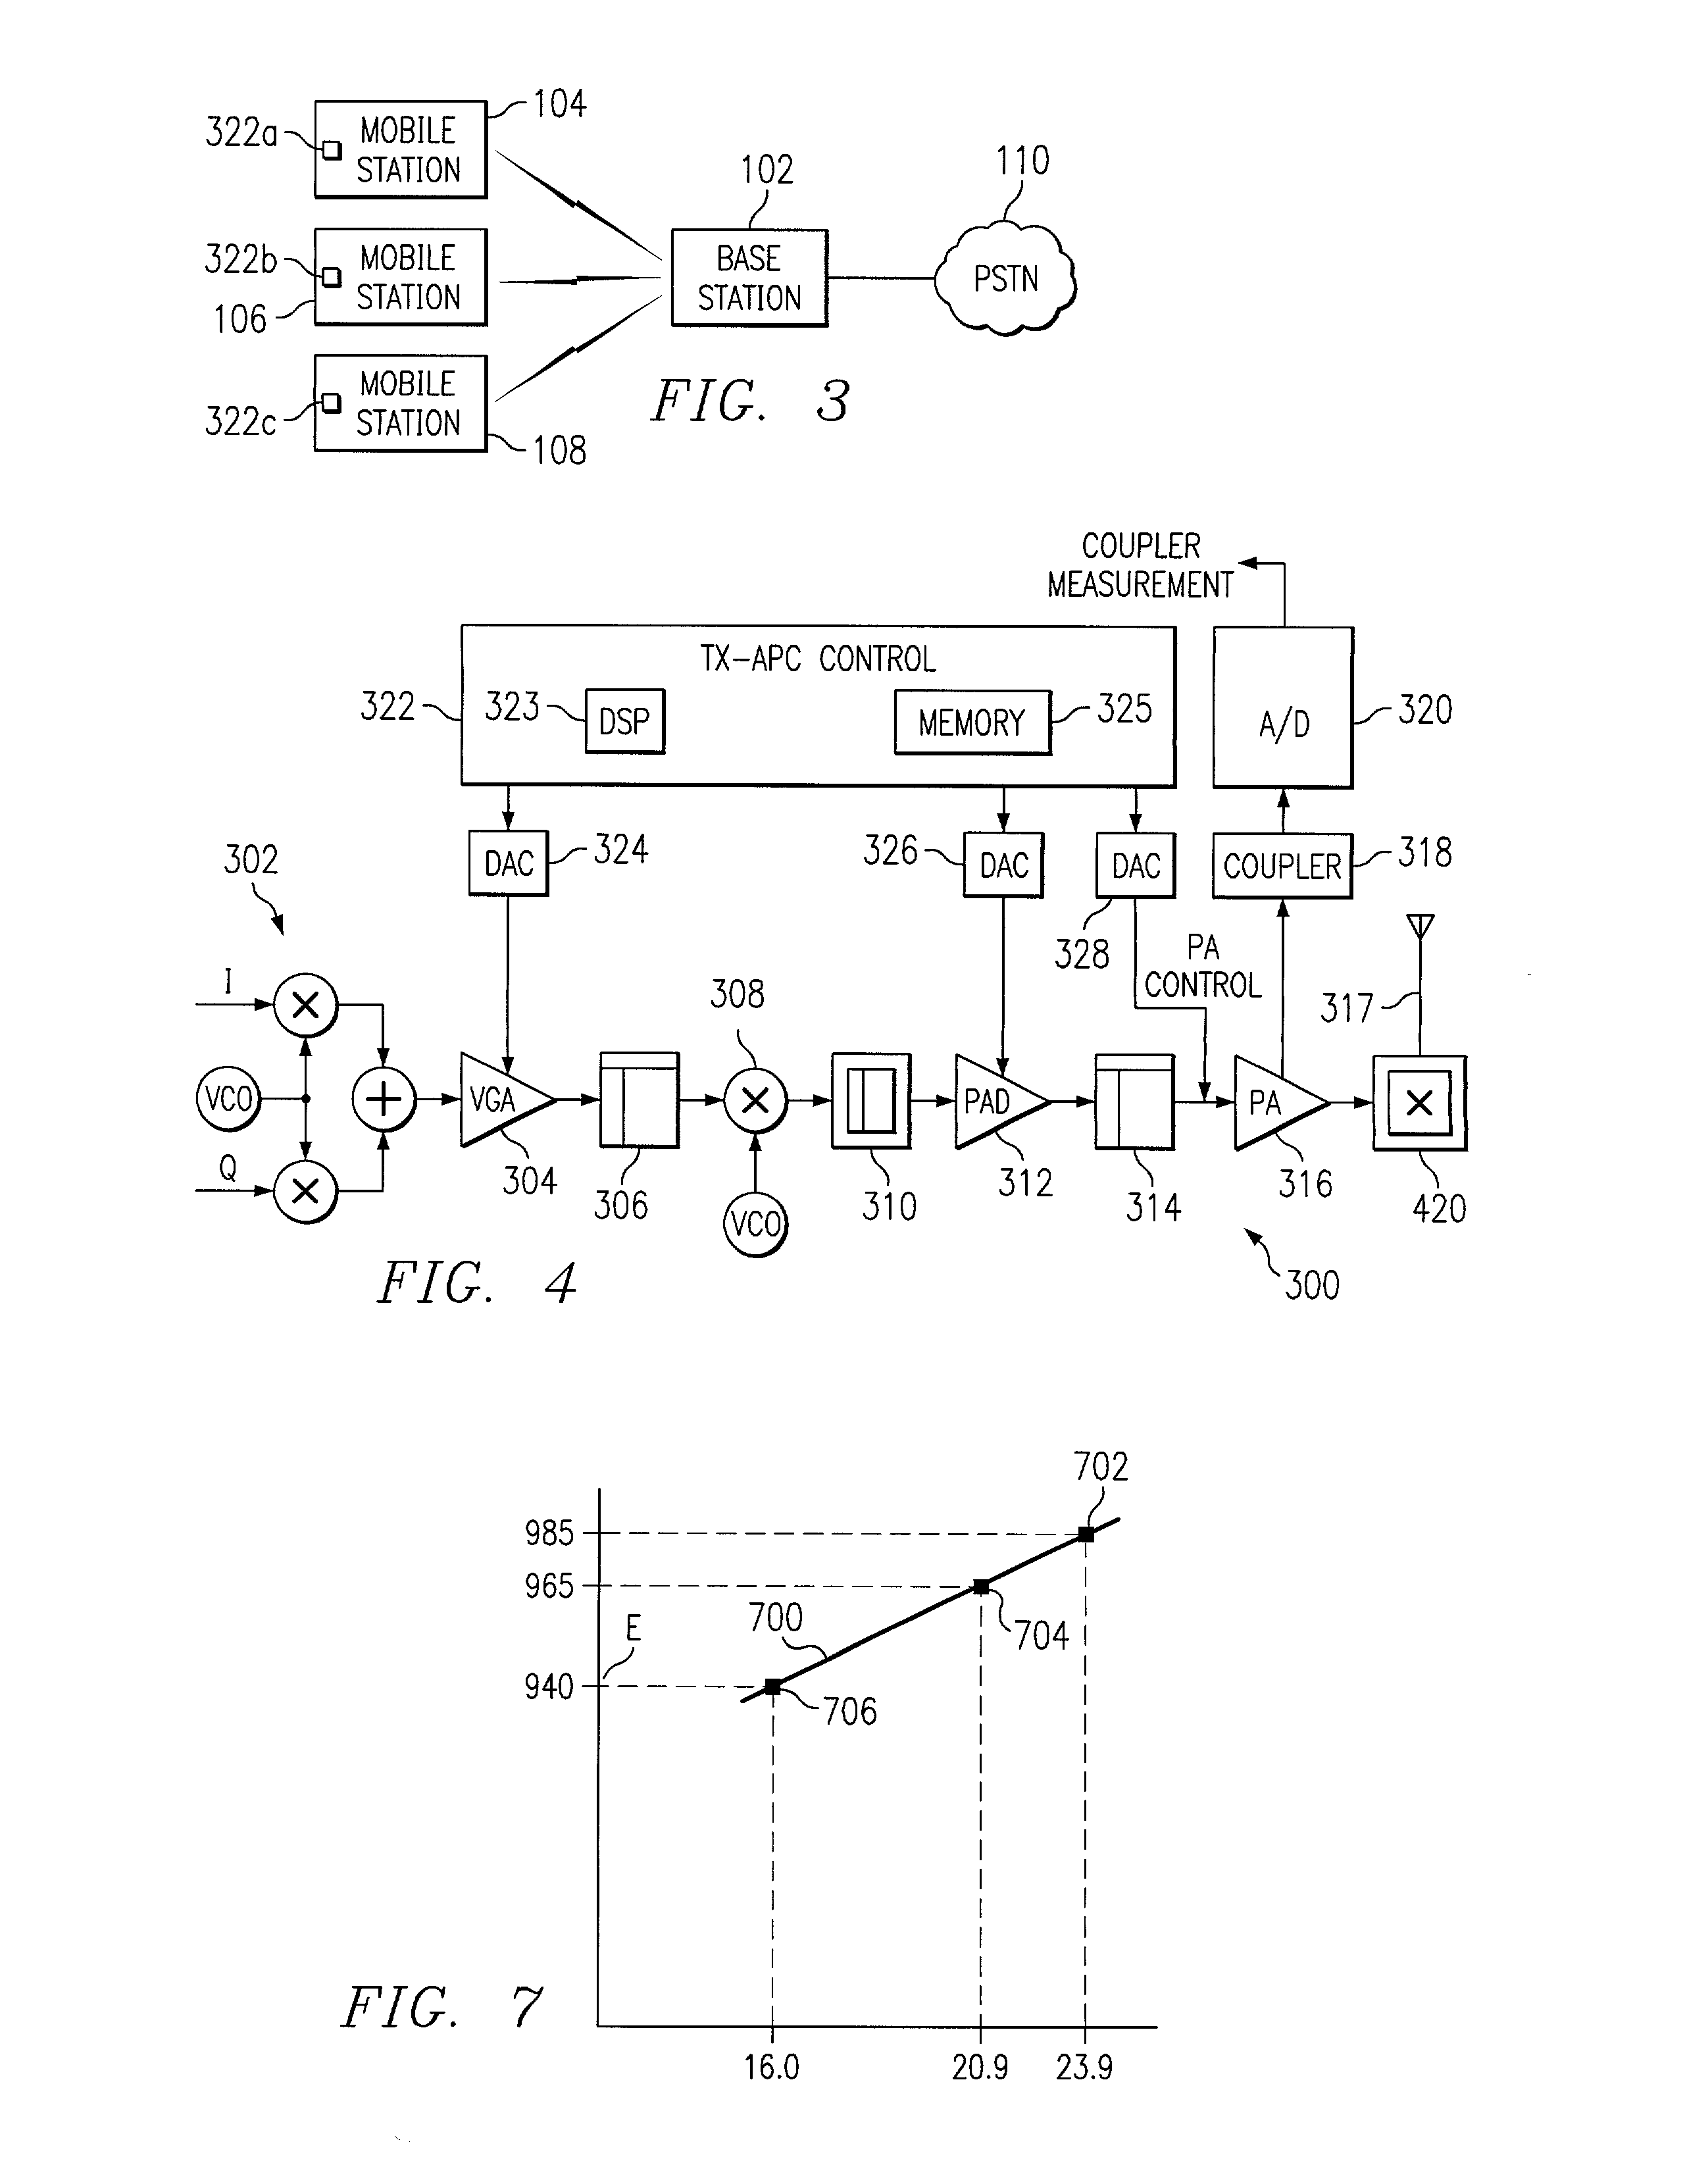 Automatic transmit power control loop